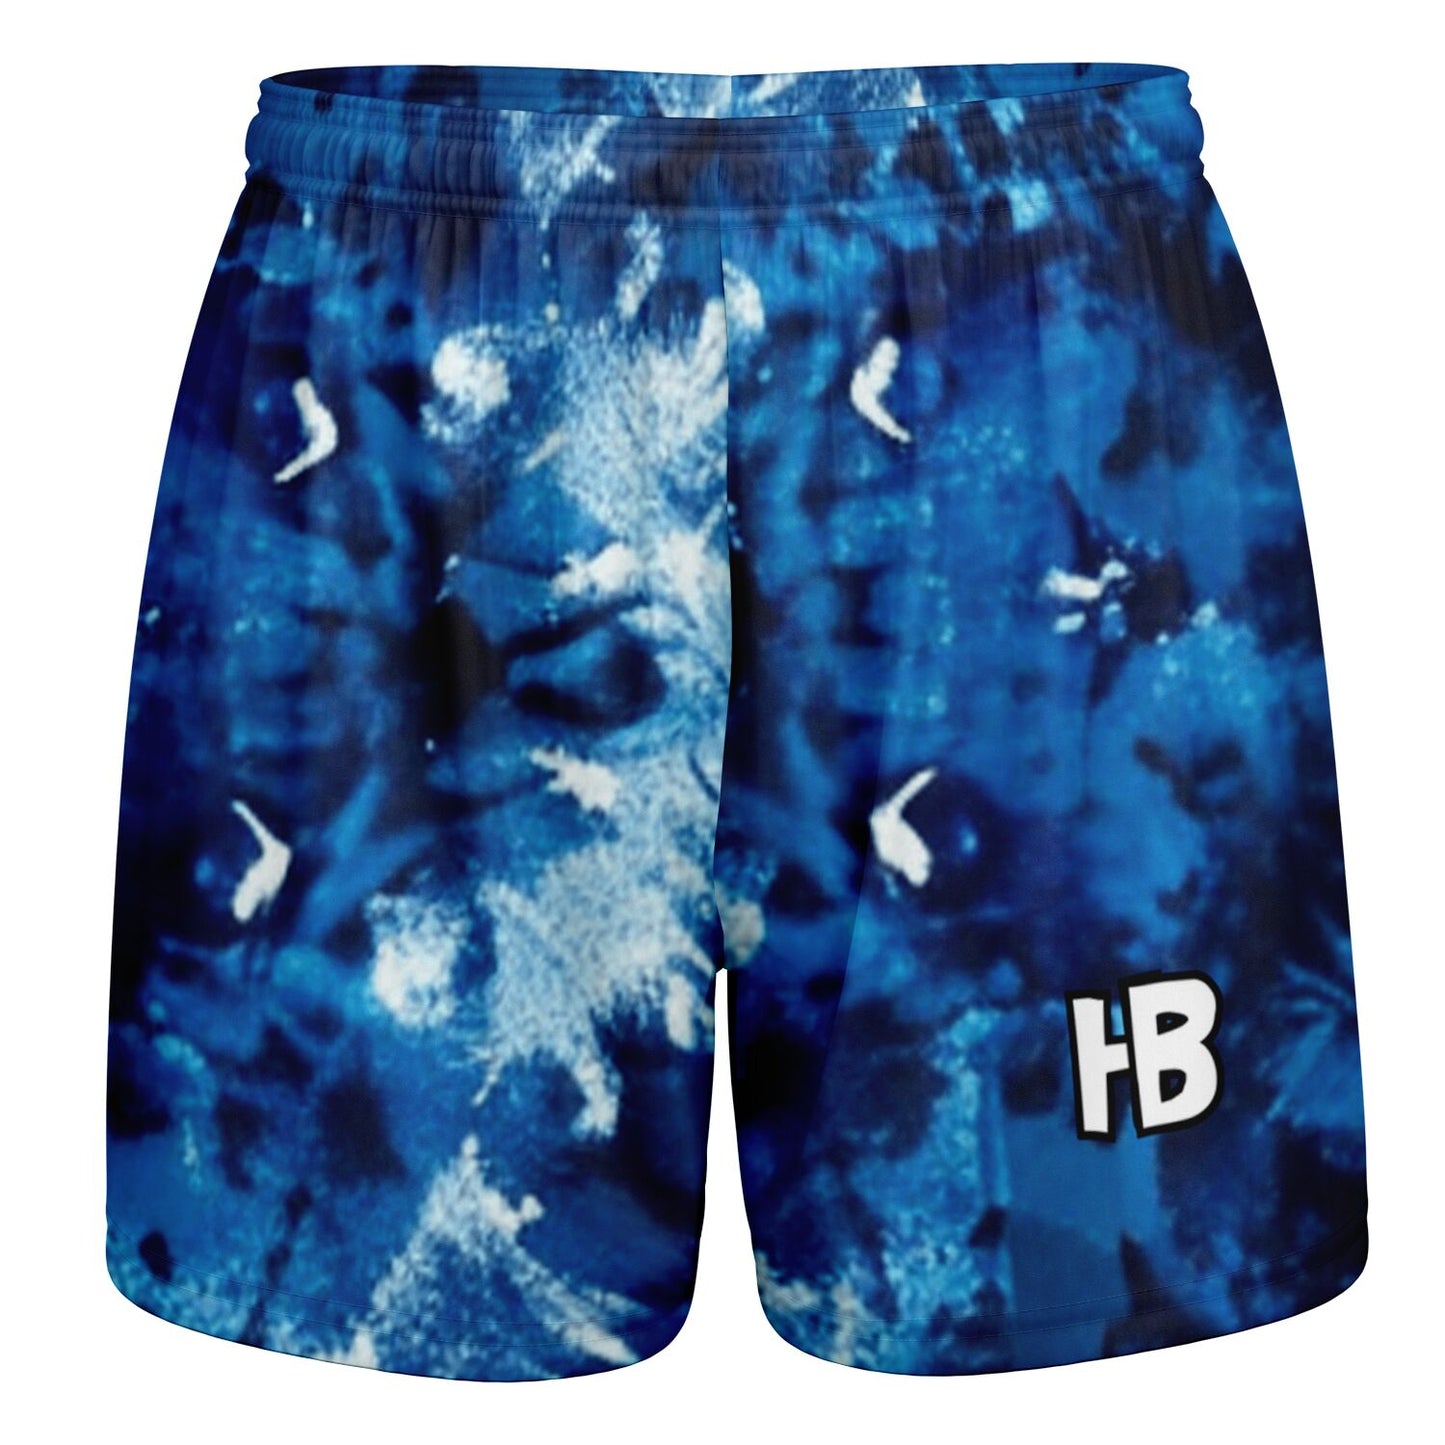 OcEAnIc TiE dYe mEnS aNd WoMEns SoCcEr ShOrTs